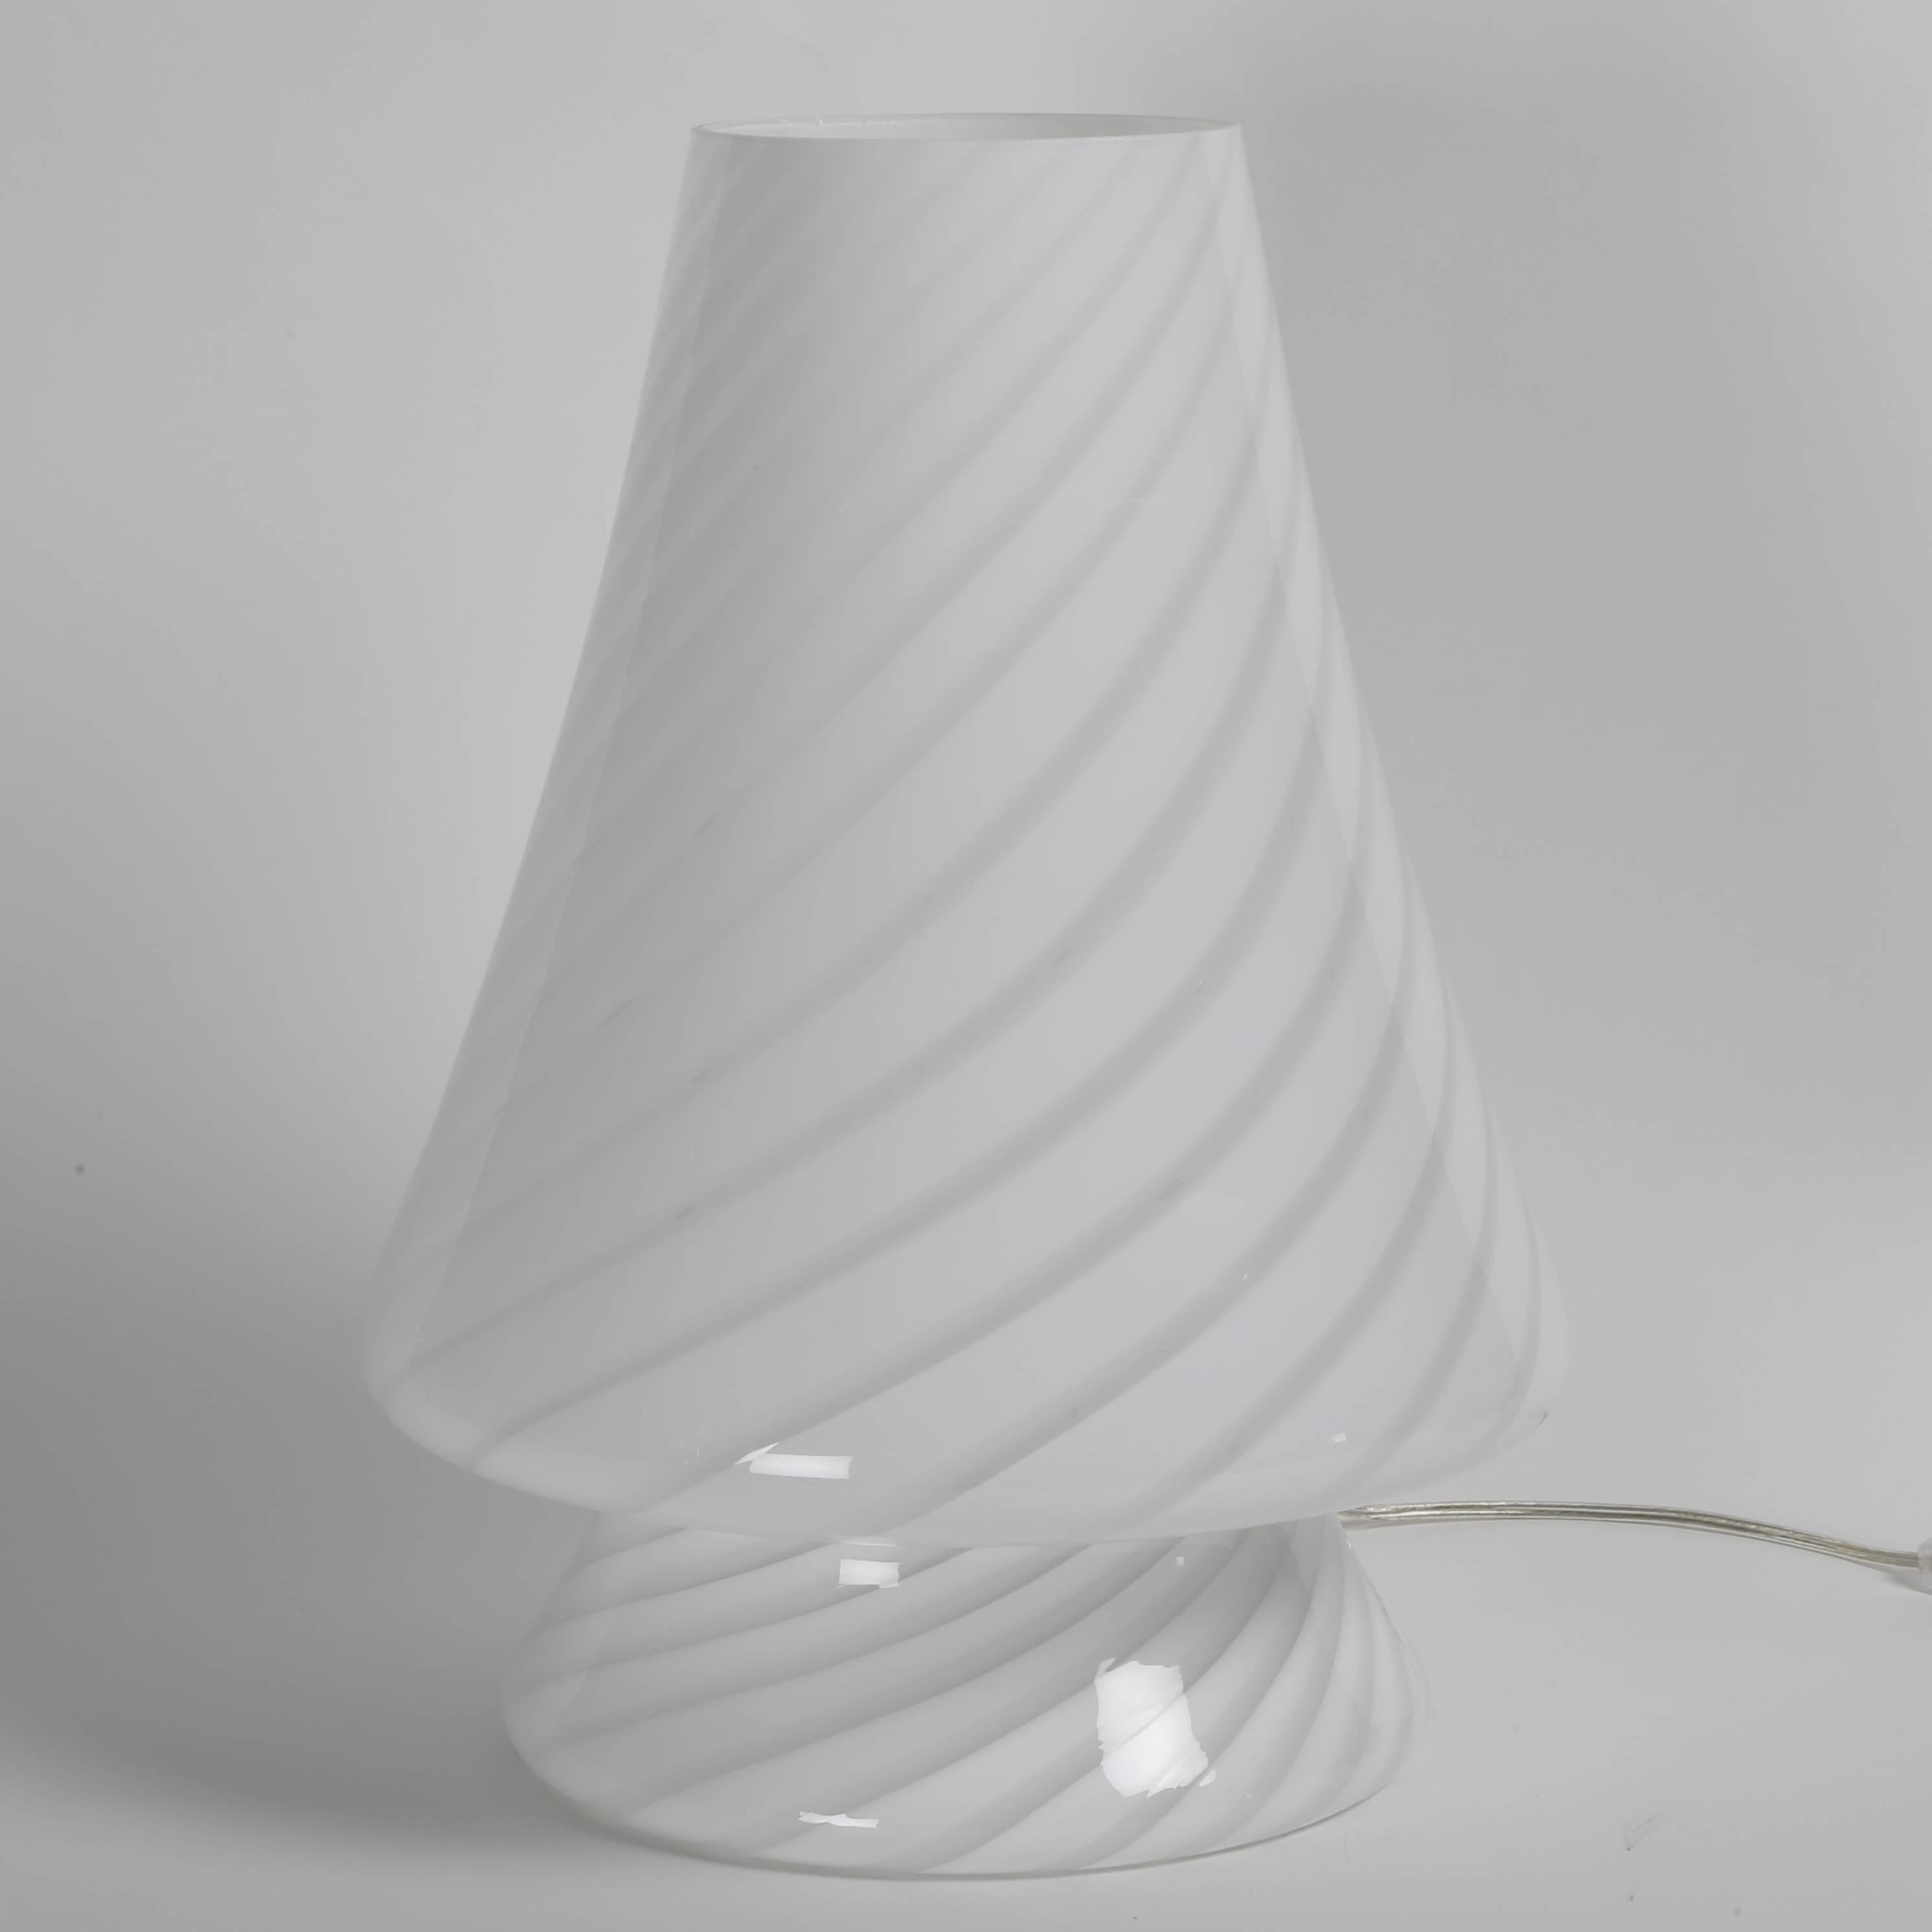 Beautiful single piece, all-glass accent lamp in swirls of clear and opaque handblown Murano glass. 75-watt maximum standard-base bulb.  This item is at the 1stdibs Gallery at the New York Design Center, 200 Lexington Ave., 10th floor, New York,